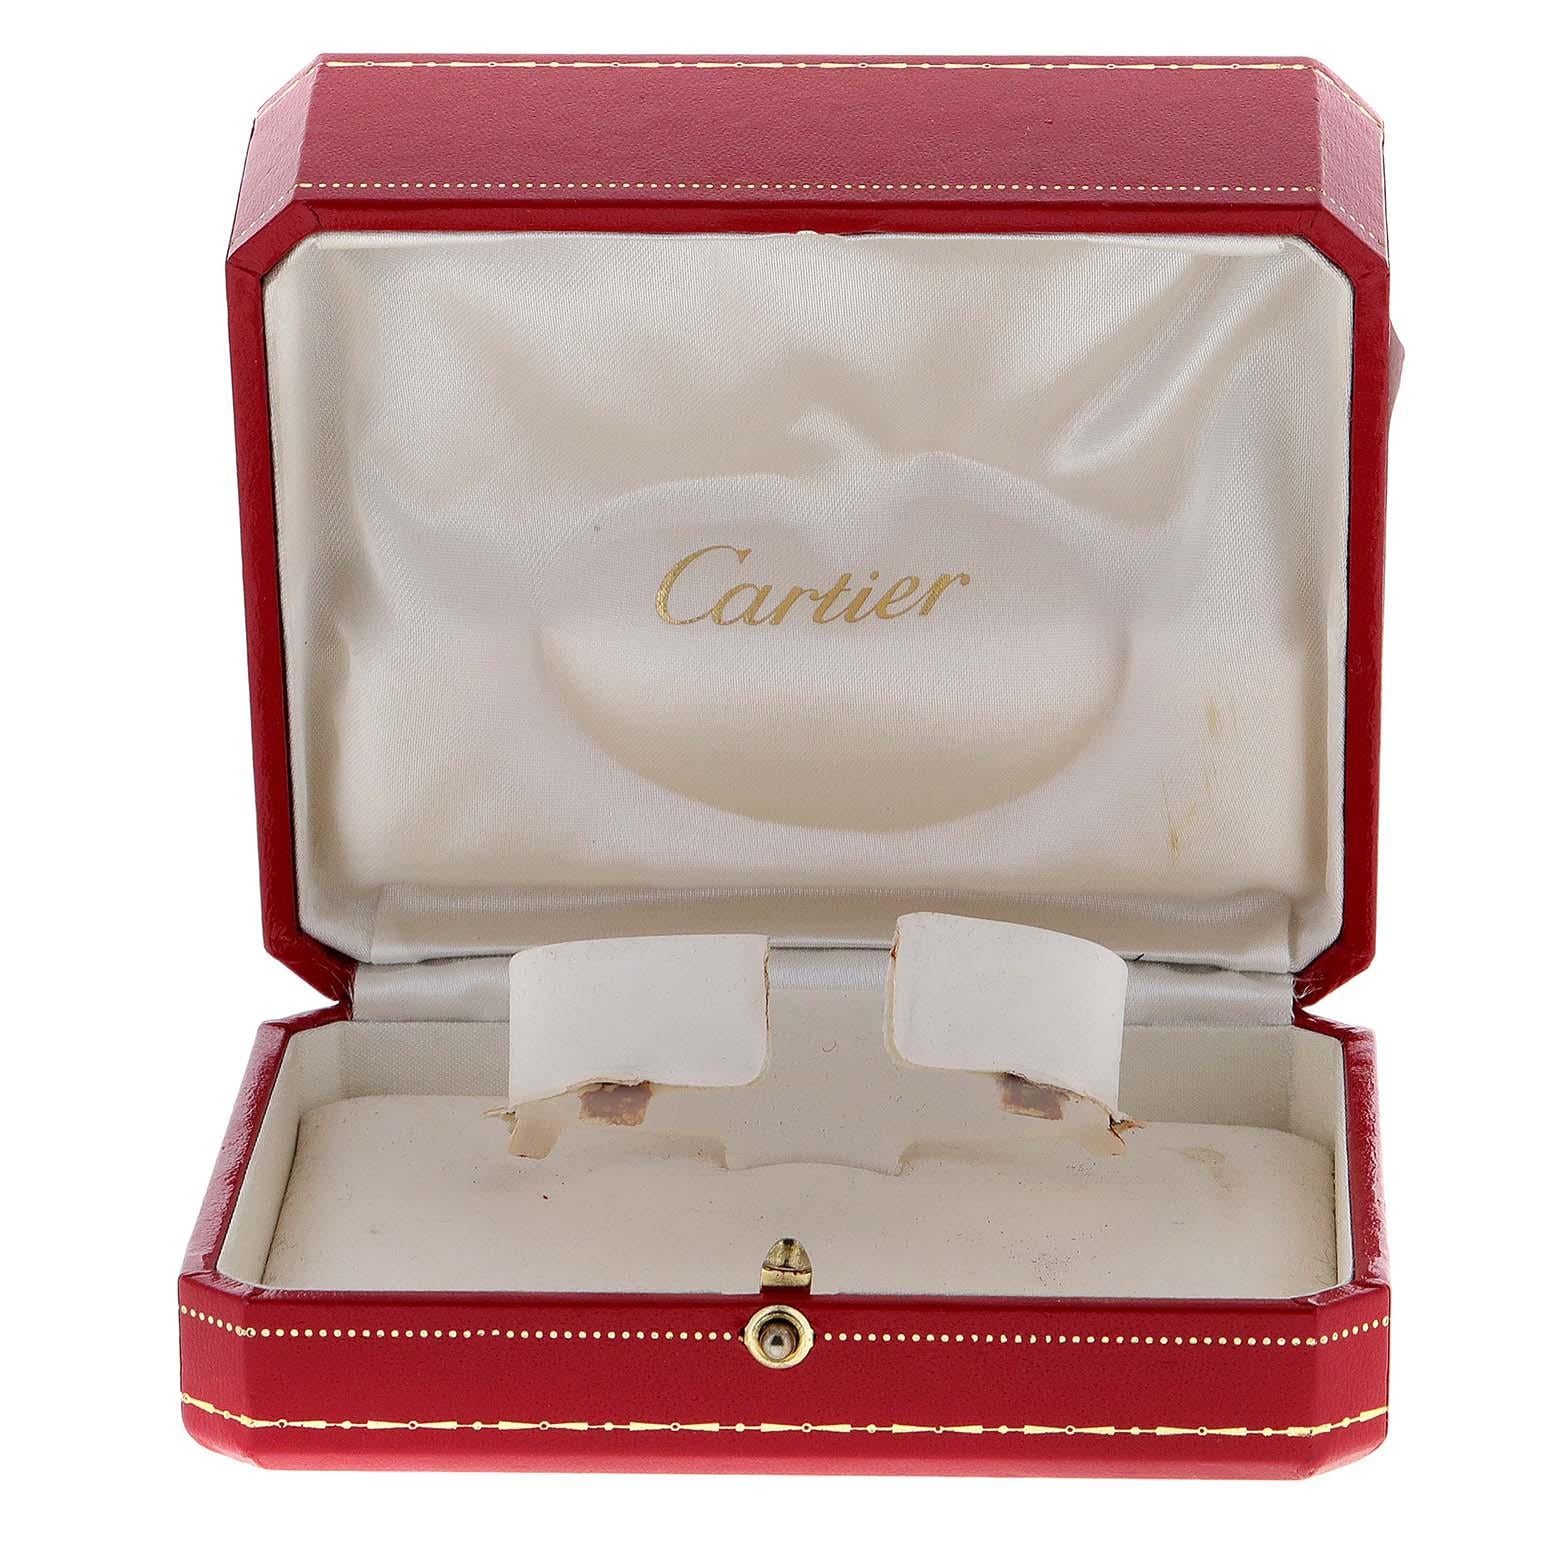 Cartier Panthere Vendome 18K Yellow Gold Ladies Watch 6692 For Sale 4